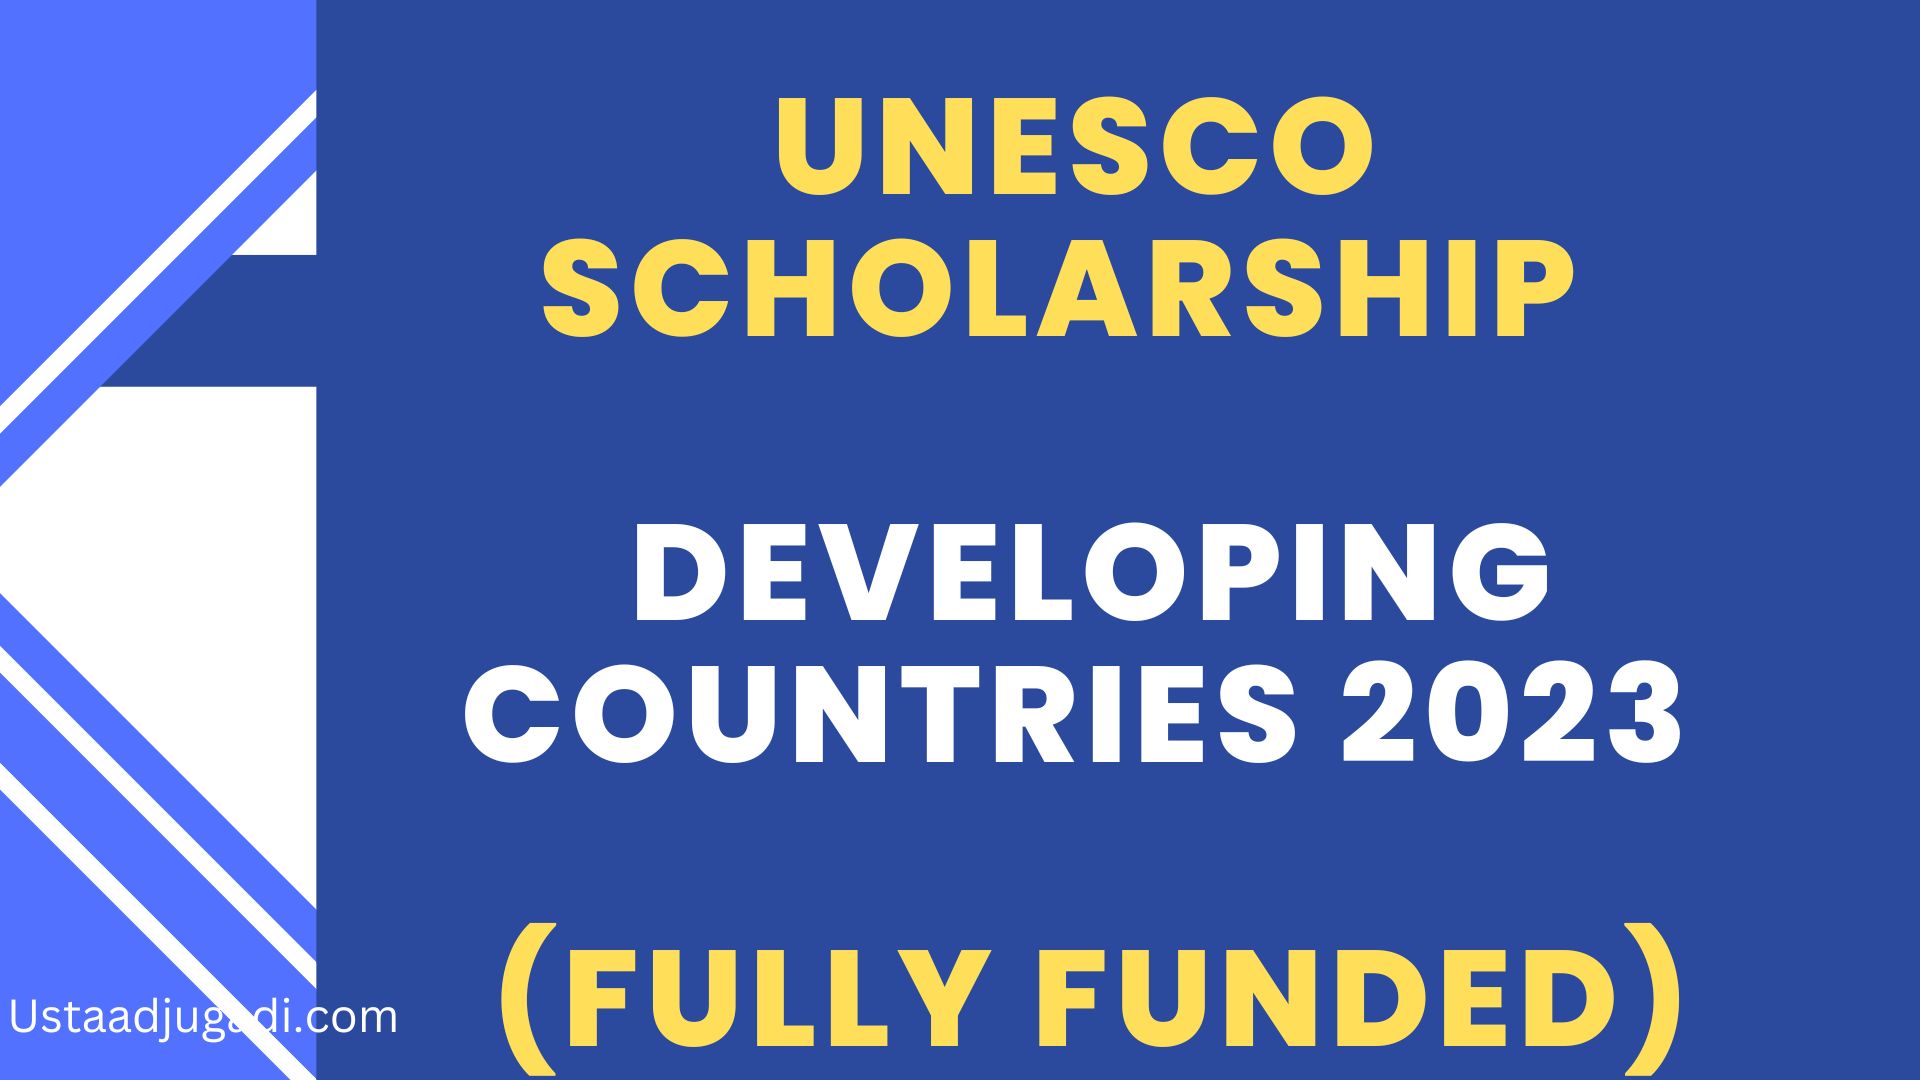 funding for education projects in developing countries 2023